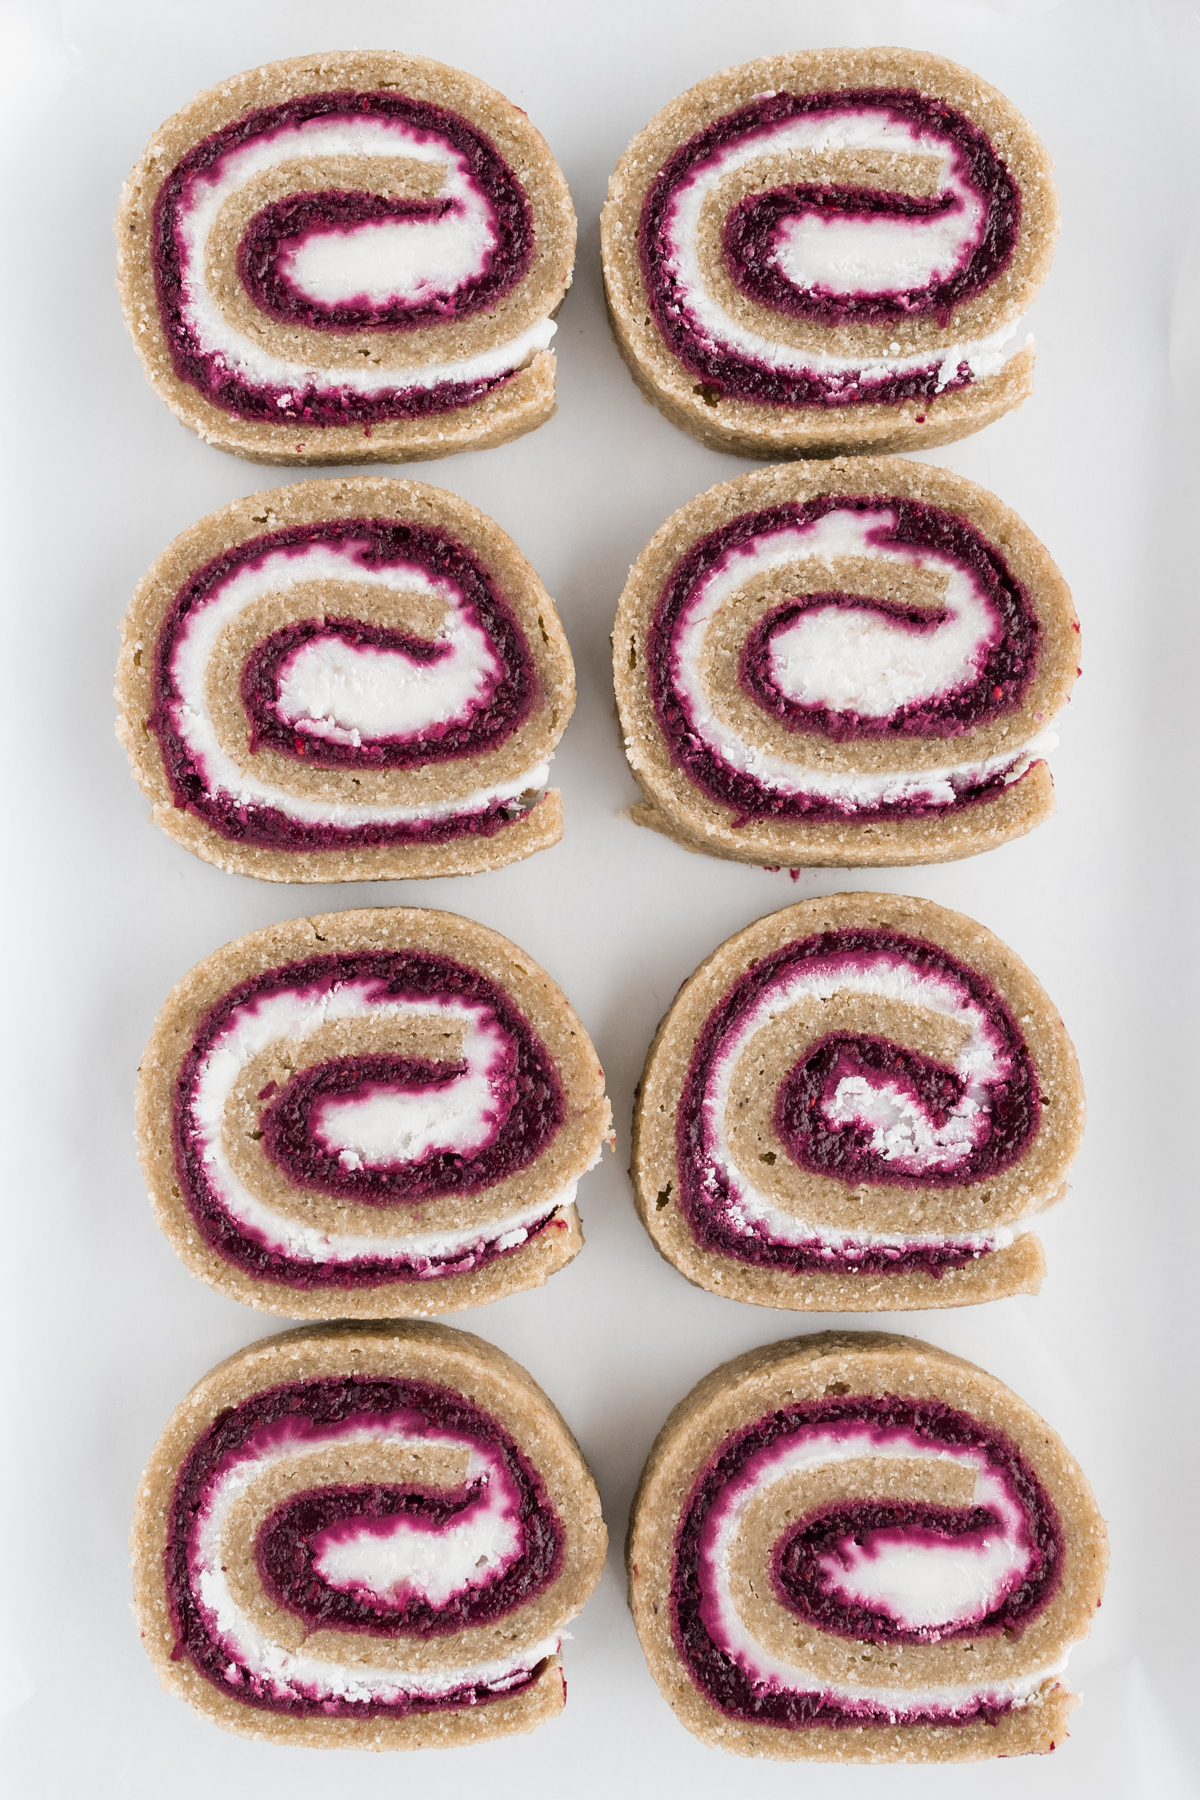 Overhead view of Raw Swiss Roll slices on a white background